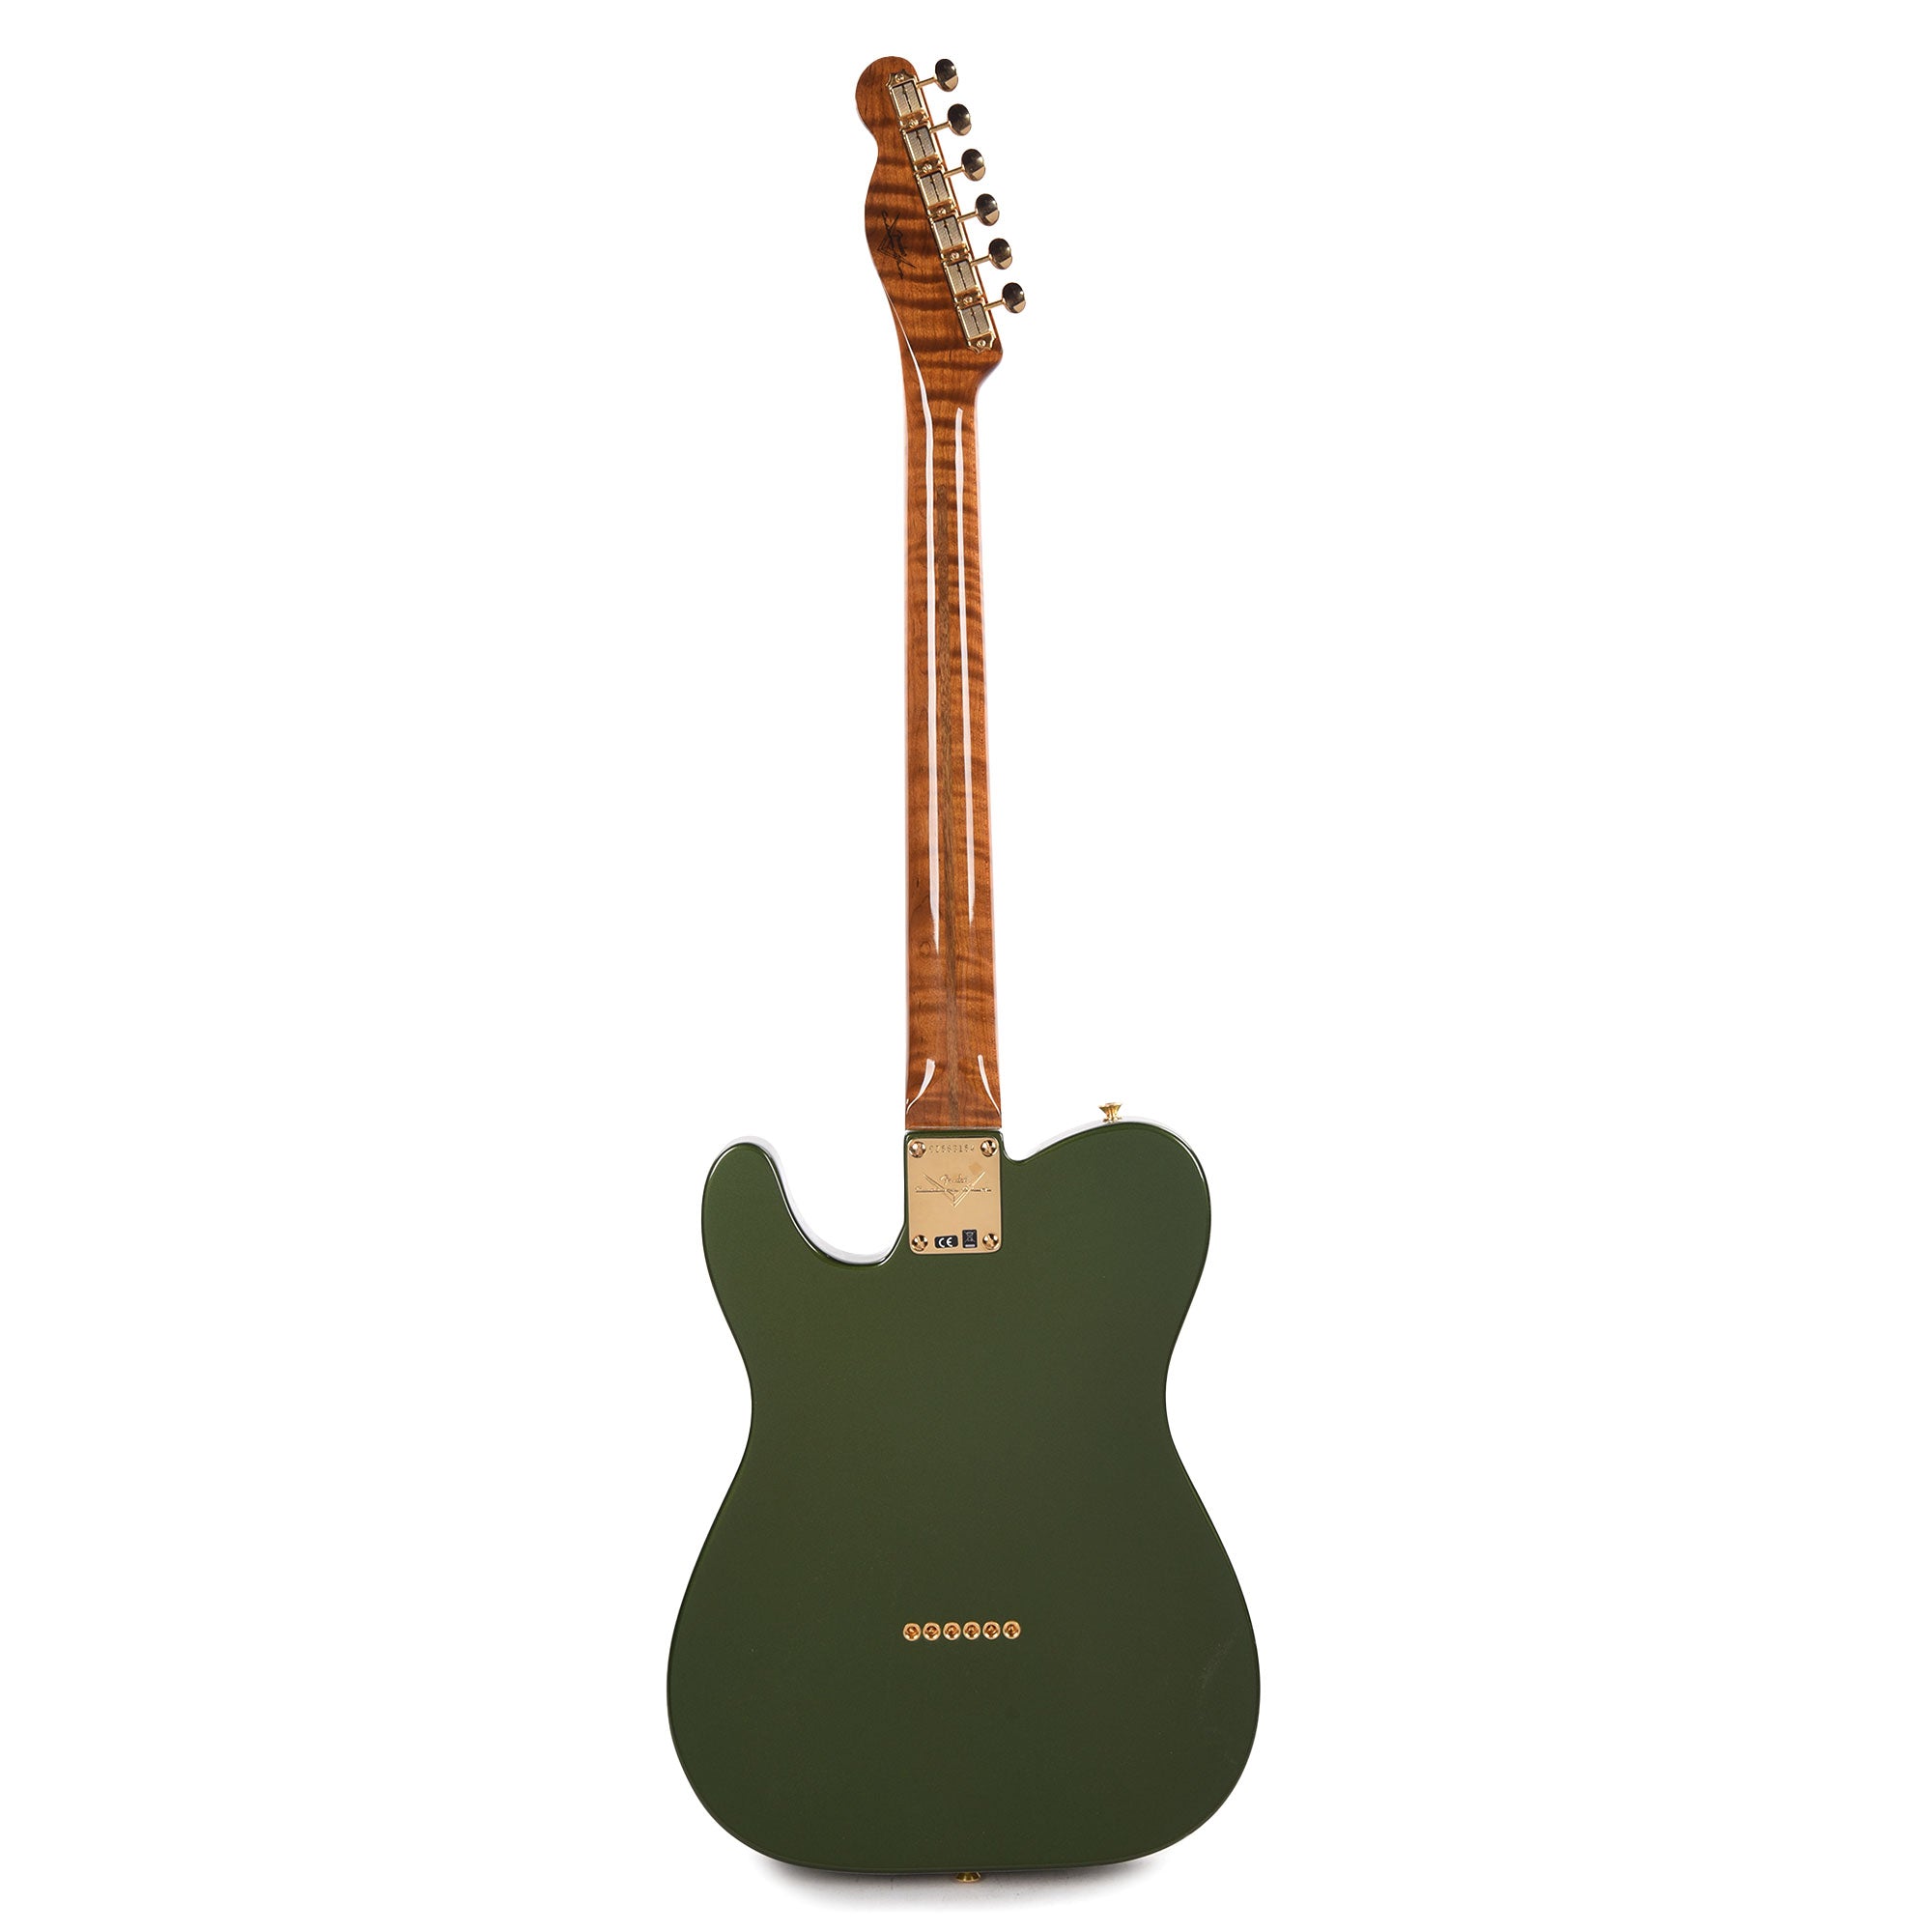 Fender Custom Shop 1950s Telecaster NOS Aged Cadillac Green w/Roasted 3A Flame Neck & Gold Hardware